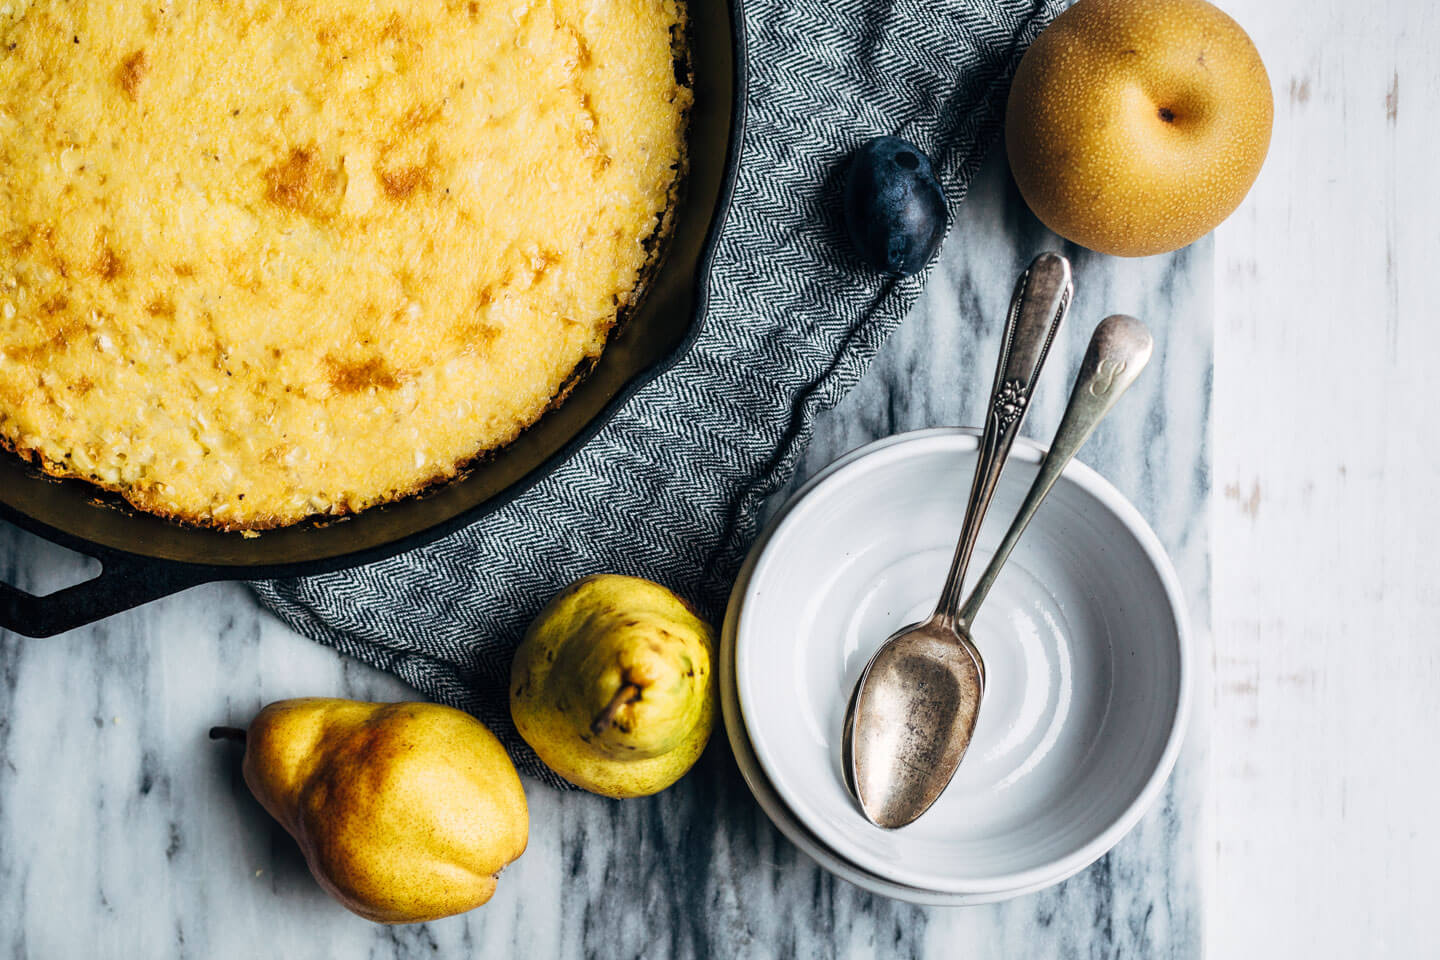 baked grits with sweet corn and fall fruit // brooklyn supper